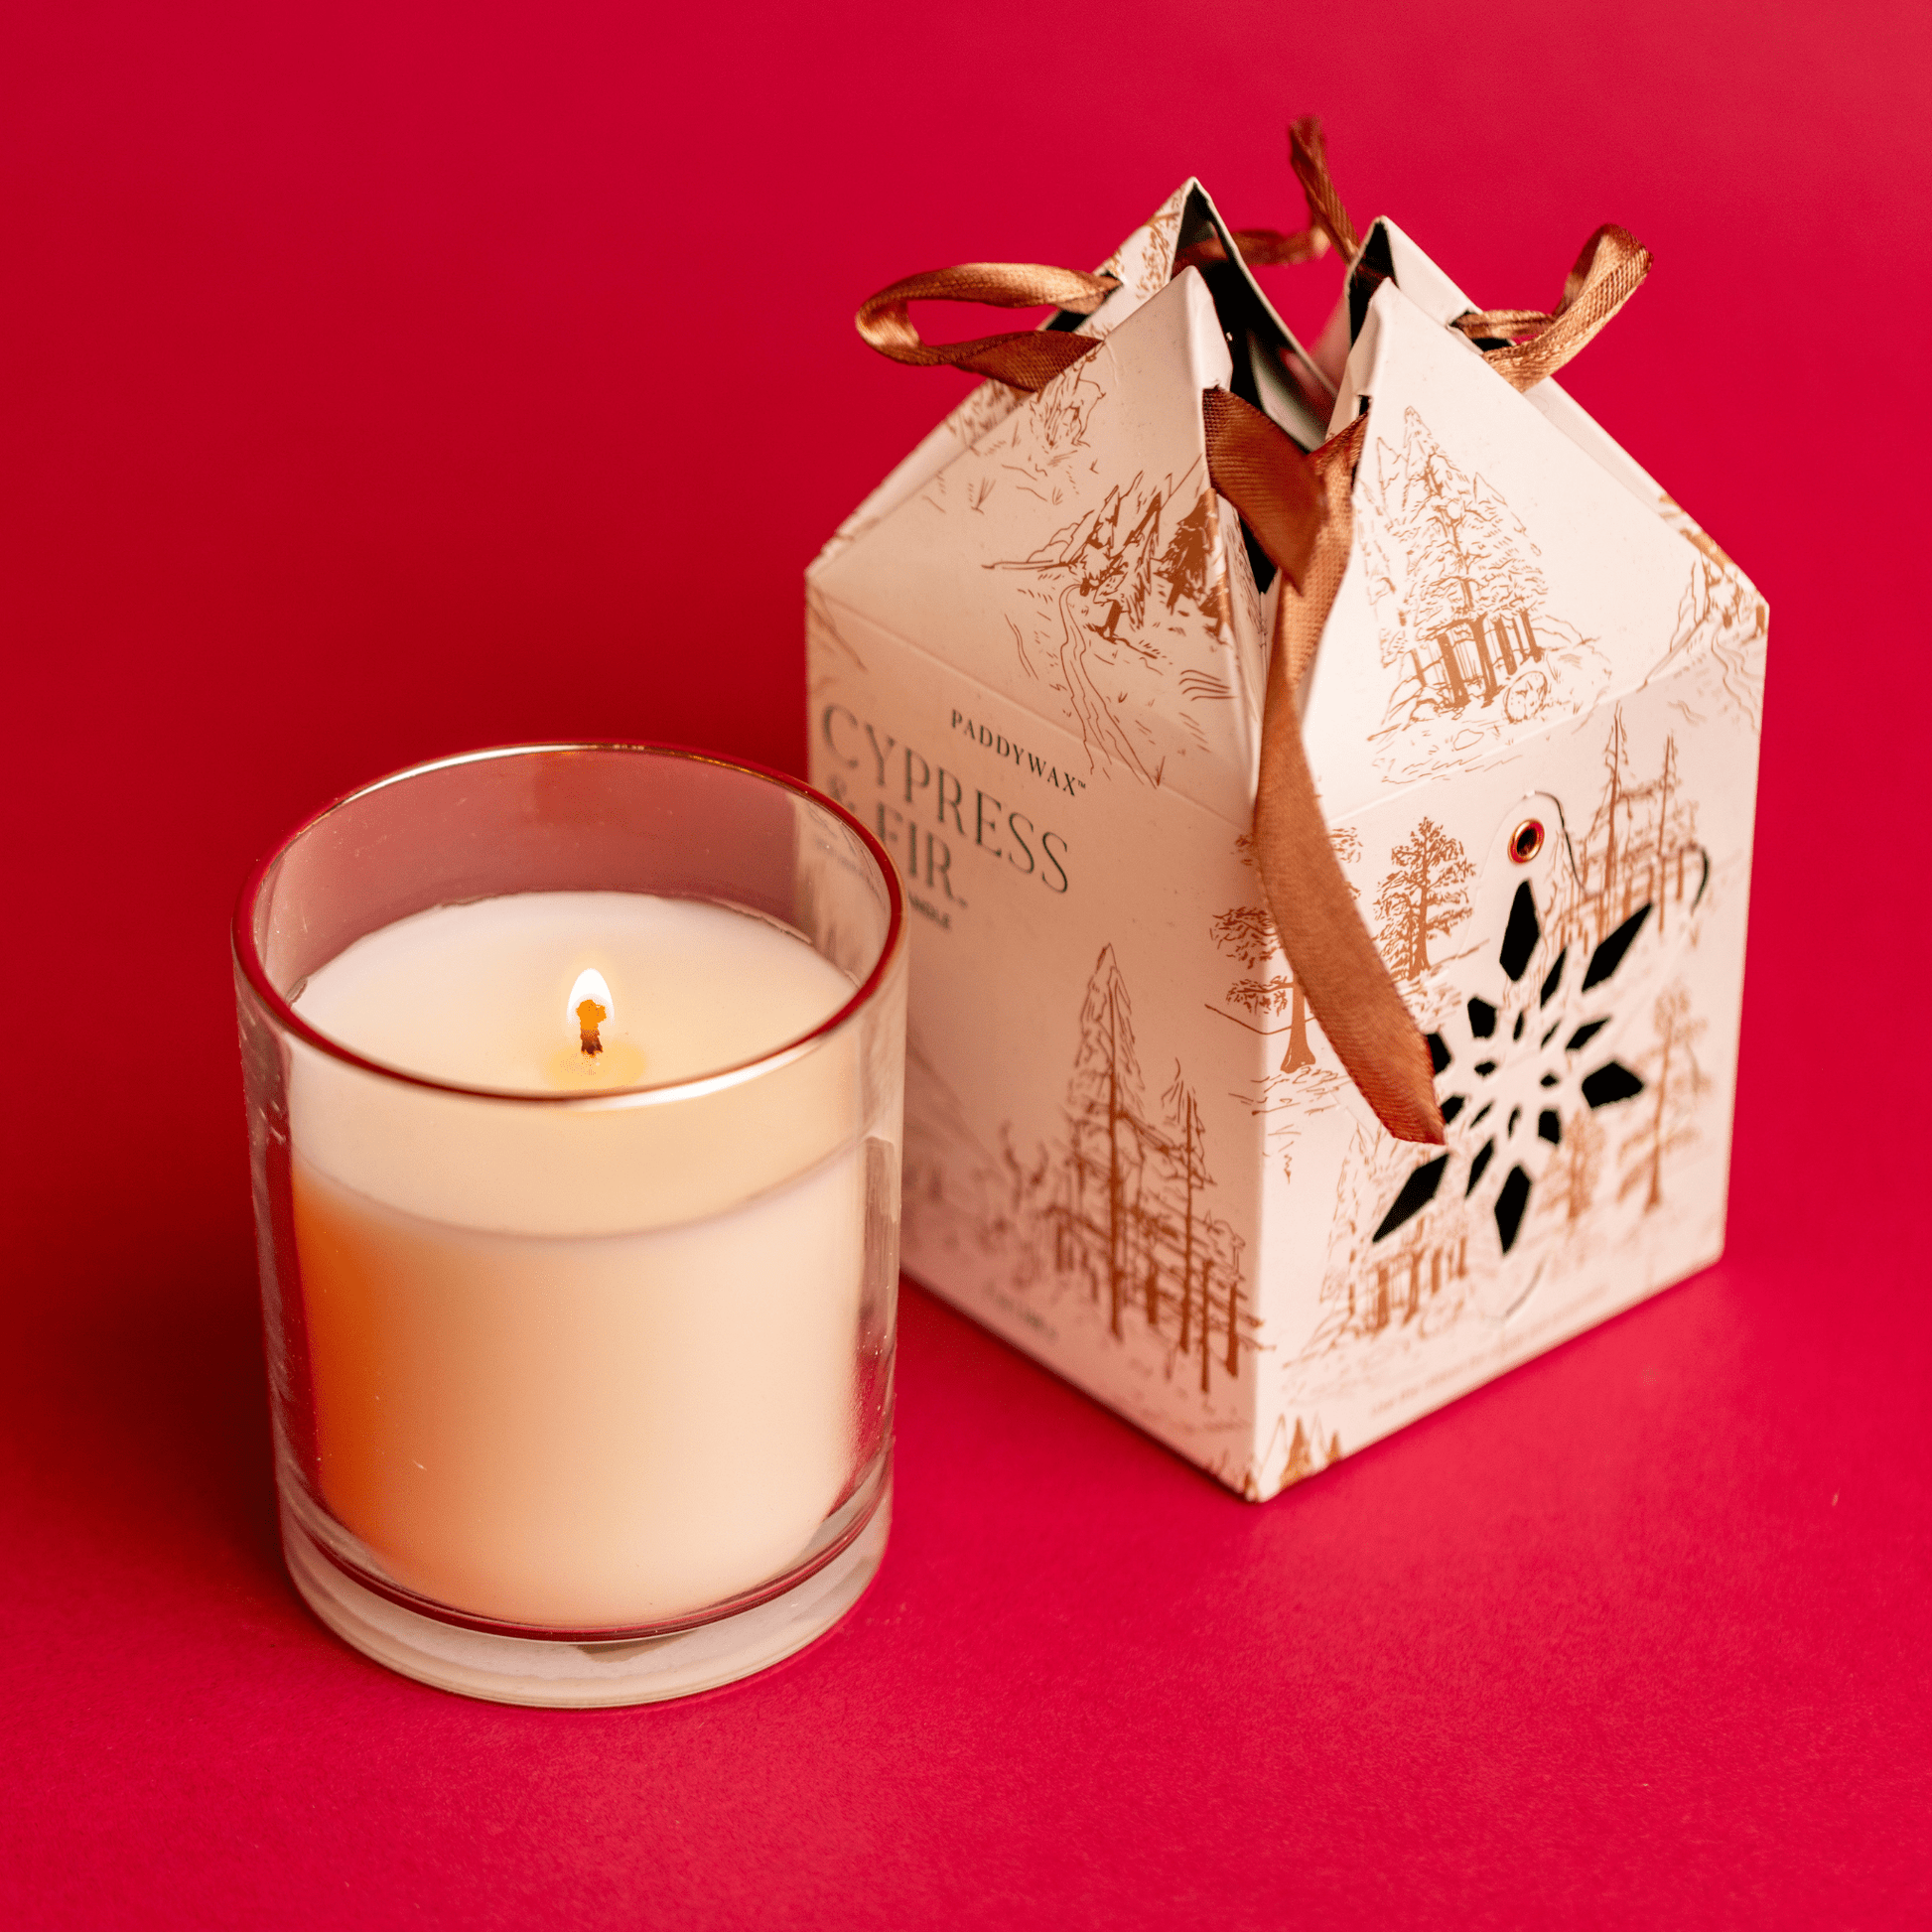 7 oz Glass Candle lit with Ornament Gift Box on red background from above